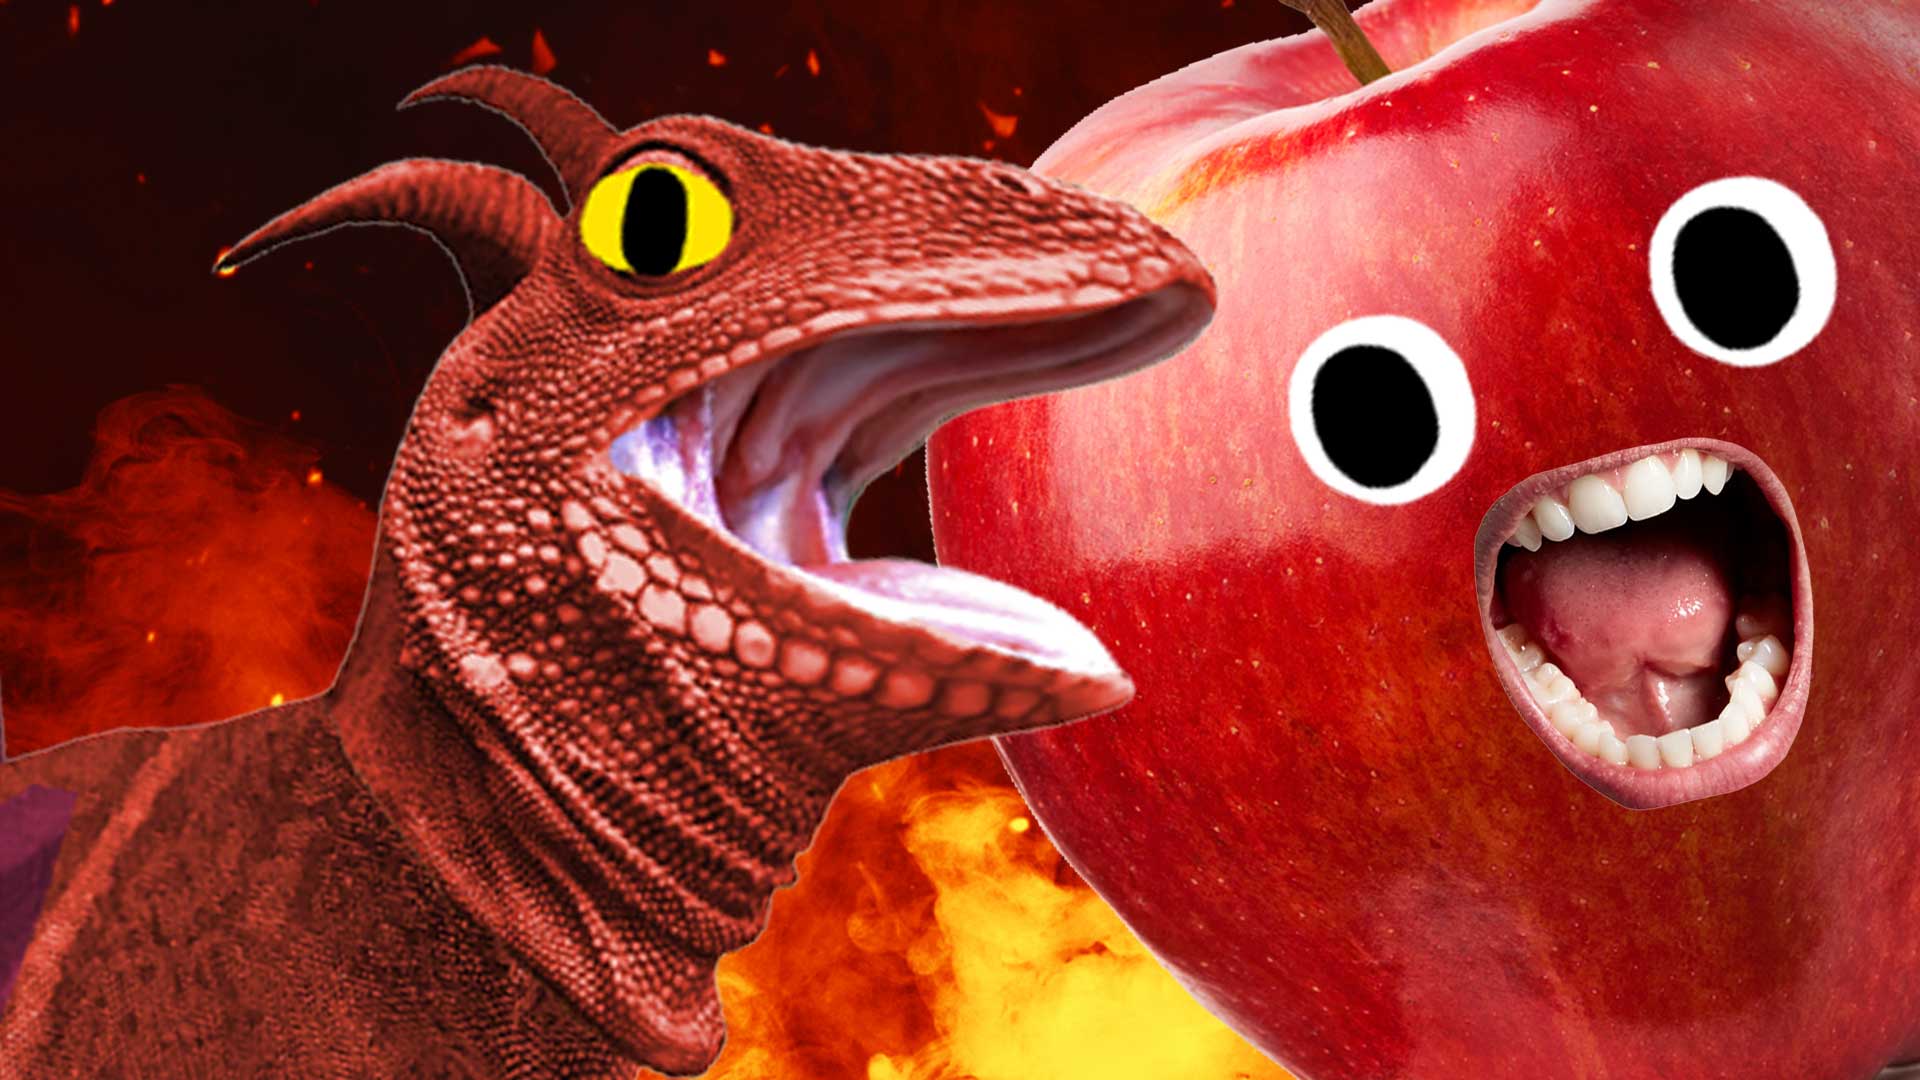 A dragon and a big red apple